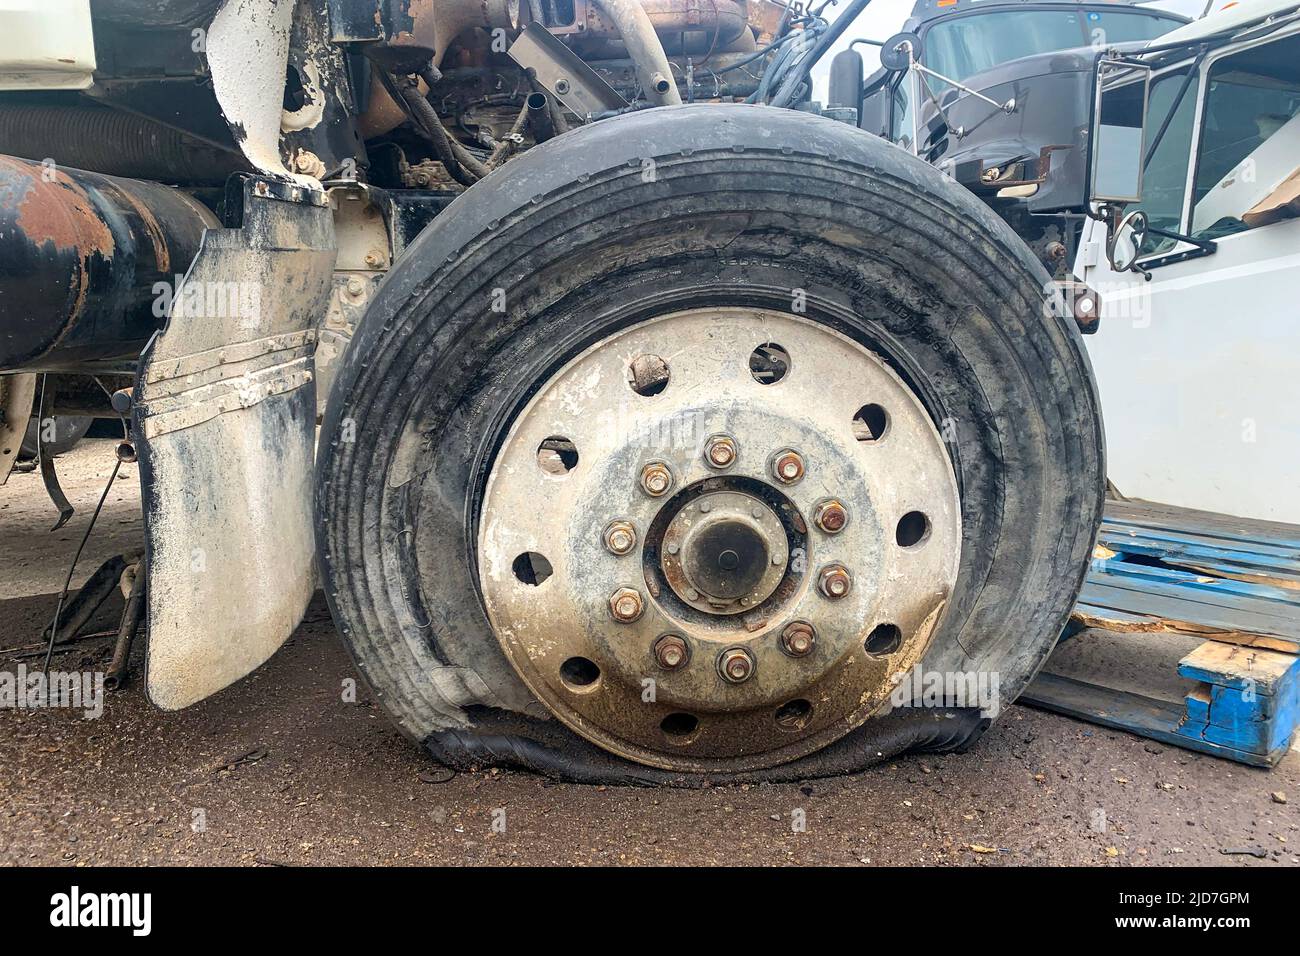 Closeup of wrecked truck wheel with a punctured or flat tire at a car junkyard after a traffic accident Stock Photo